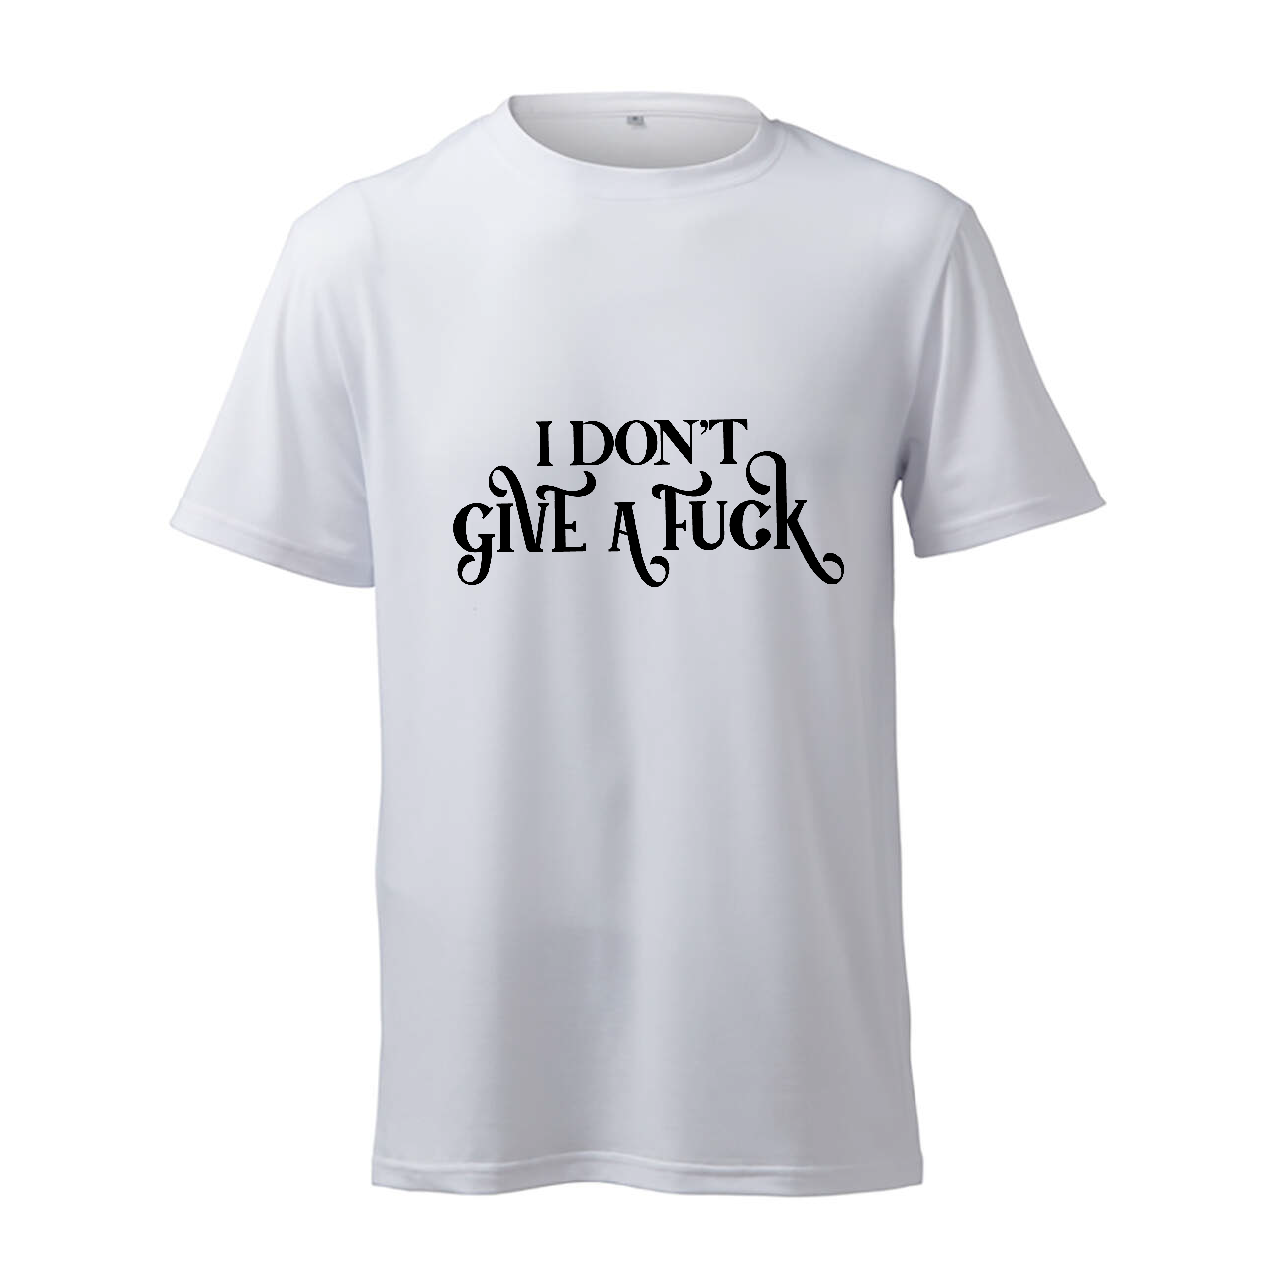 I Don't Give A Fuck - T-Shirt